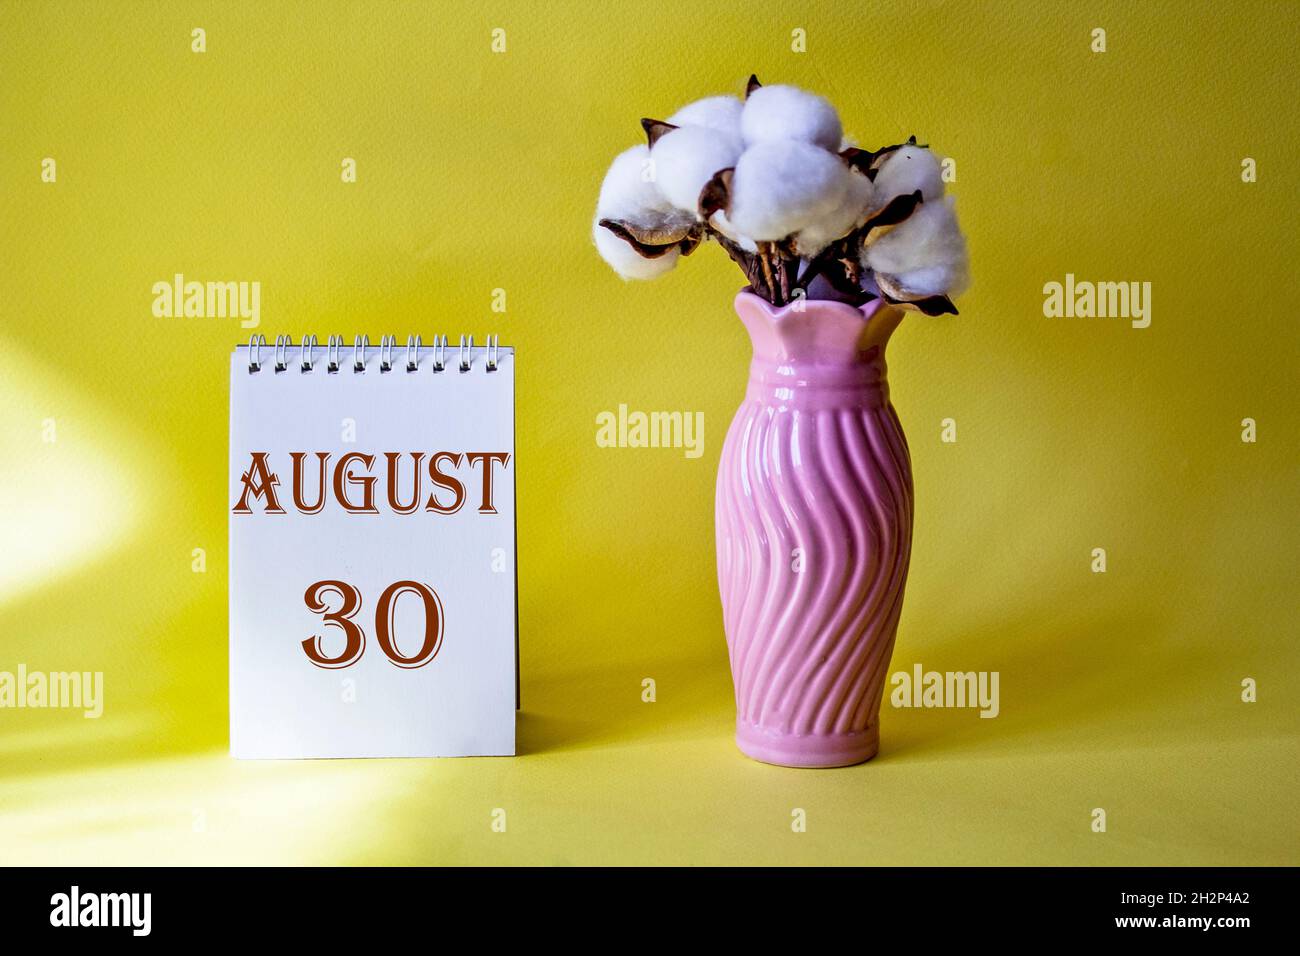 Calendar with text 30 august on yellow background and with a vase of flowers Stock Photo